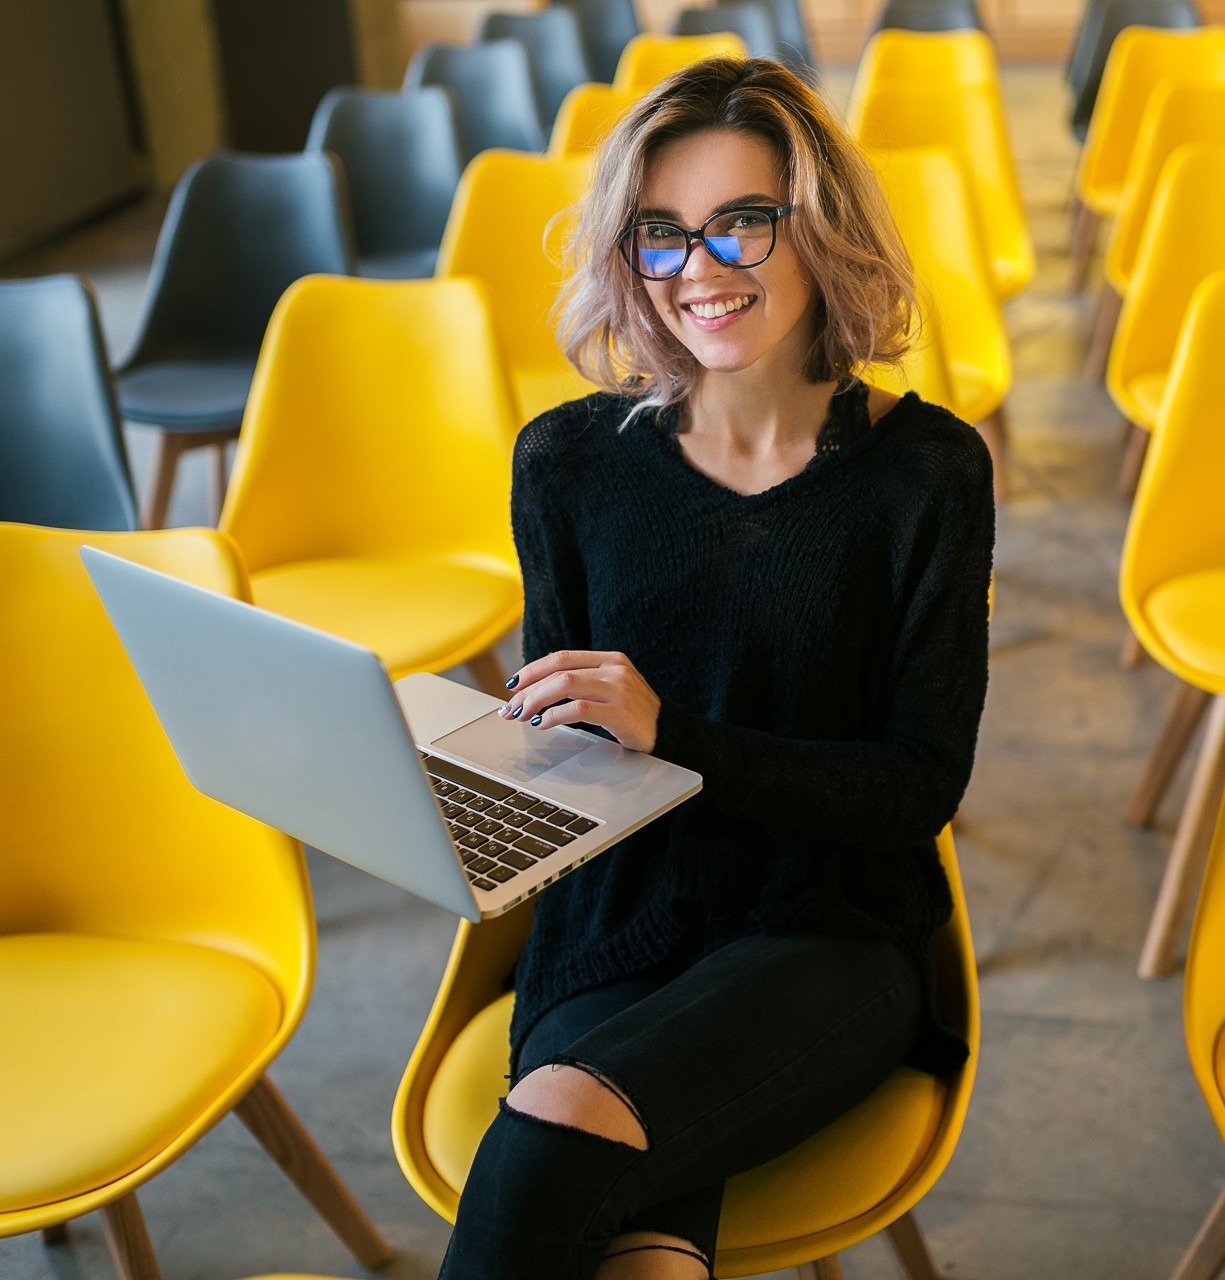 16601225128027-portrait-young-attractive-woman-sitting-lecture-hall-working-laptop-wearing-glas.jpg